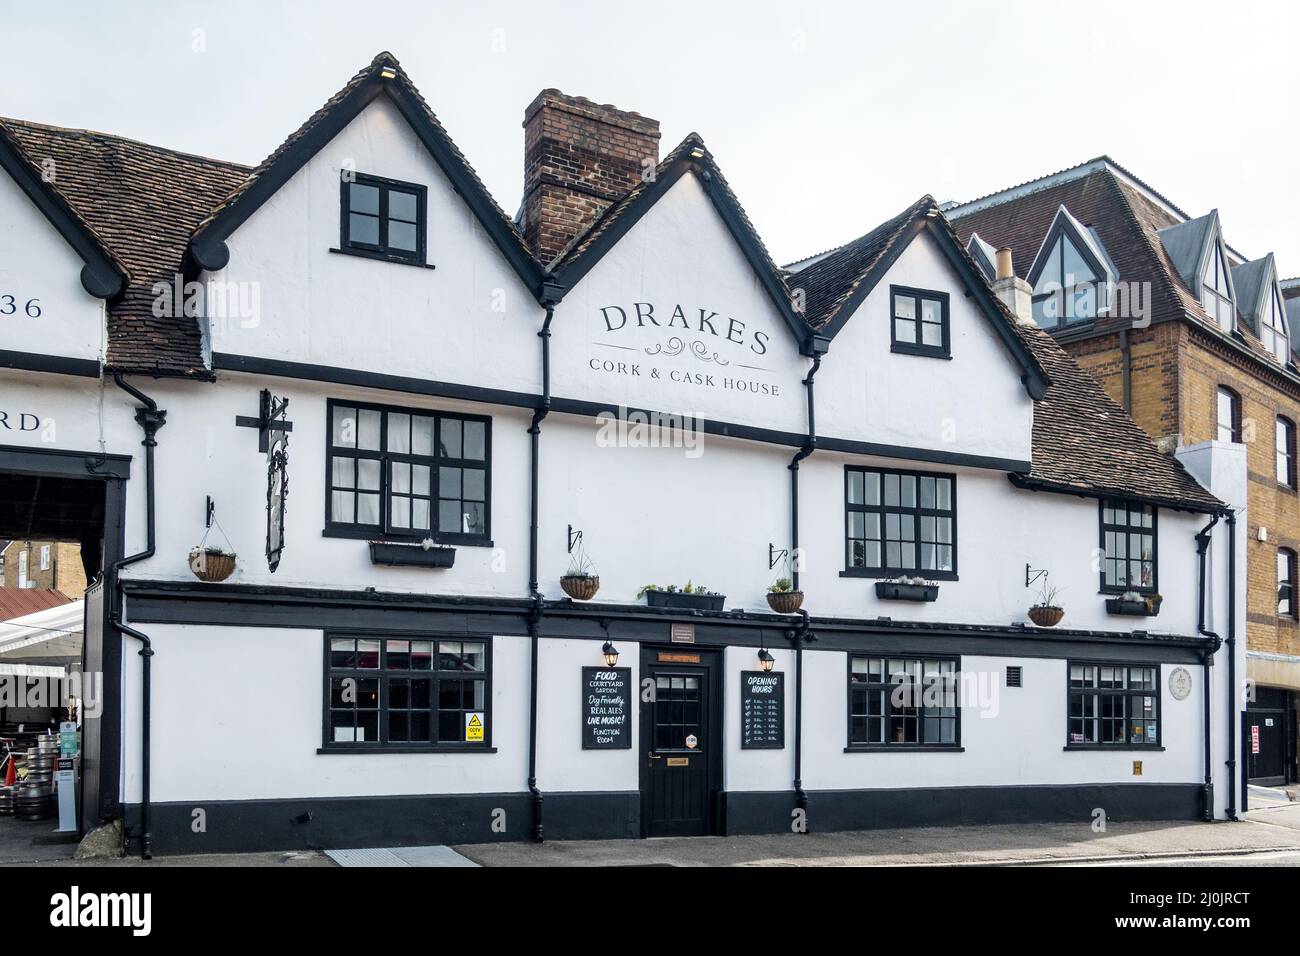 MAIDSTONE, KENT, UK - SEPTEMBER 6: View of Drakes Cork and Cask house in Maidstone on September 6, 2021 Stock Photo